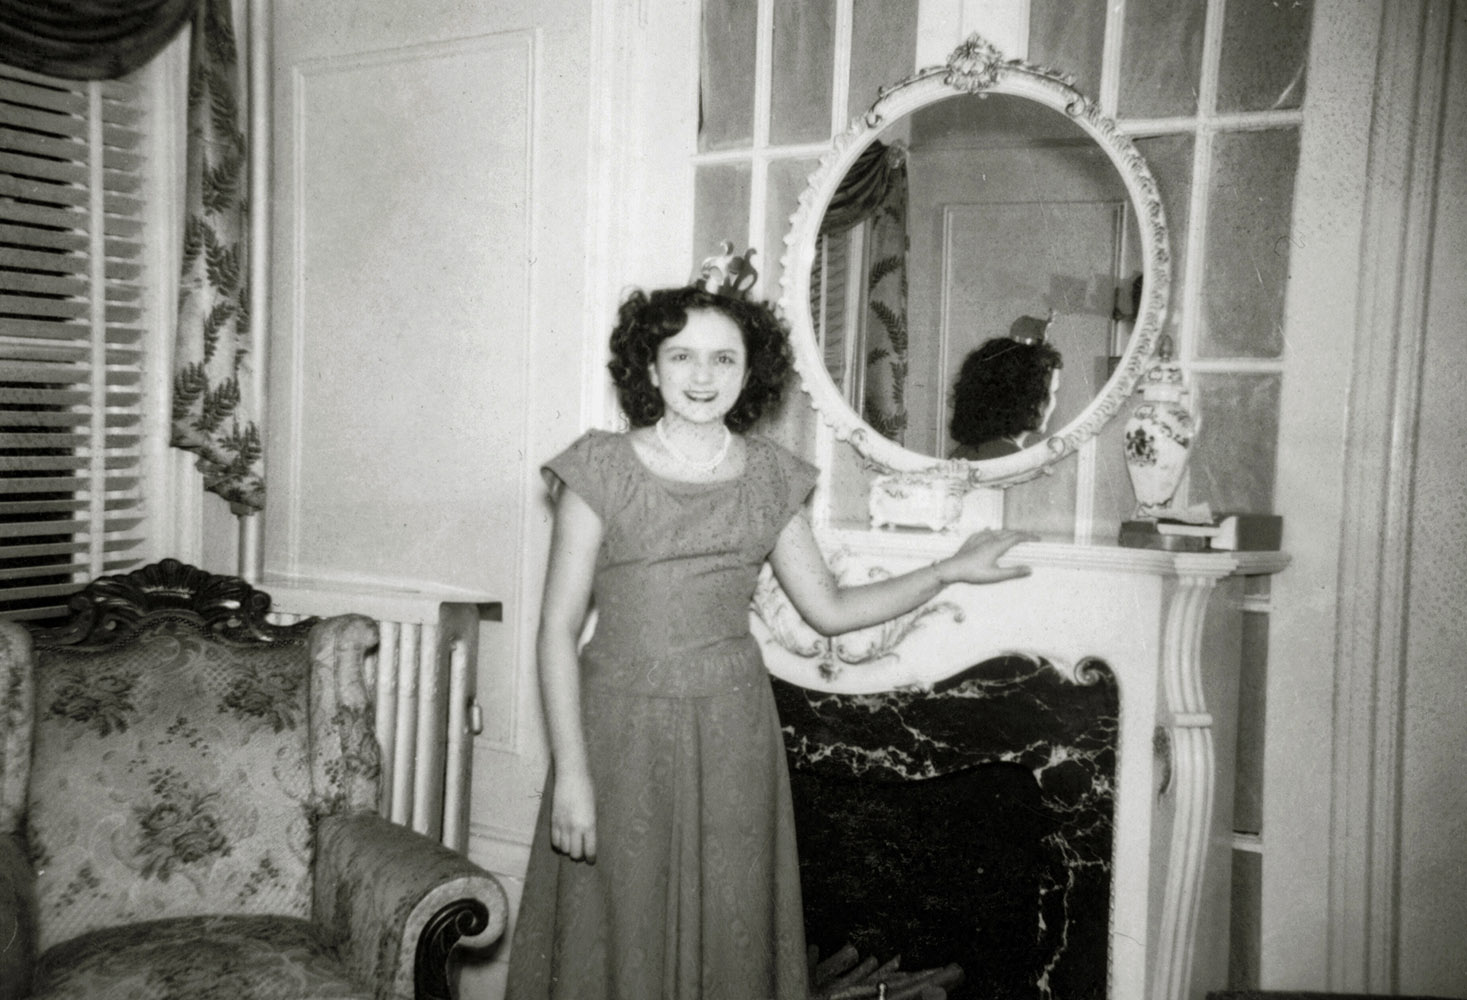 Shirley Schlanger as a teenager dressed up